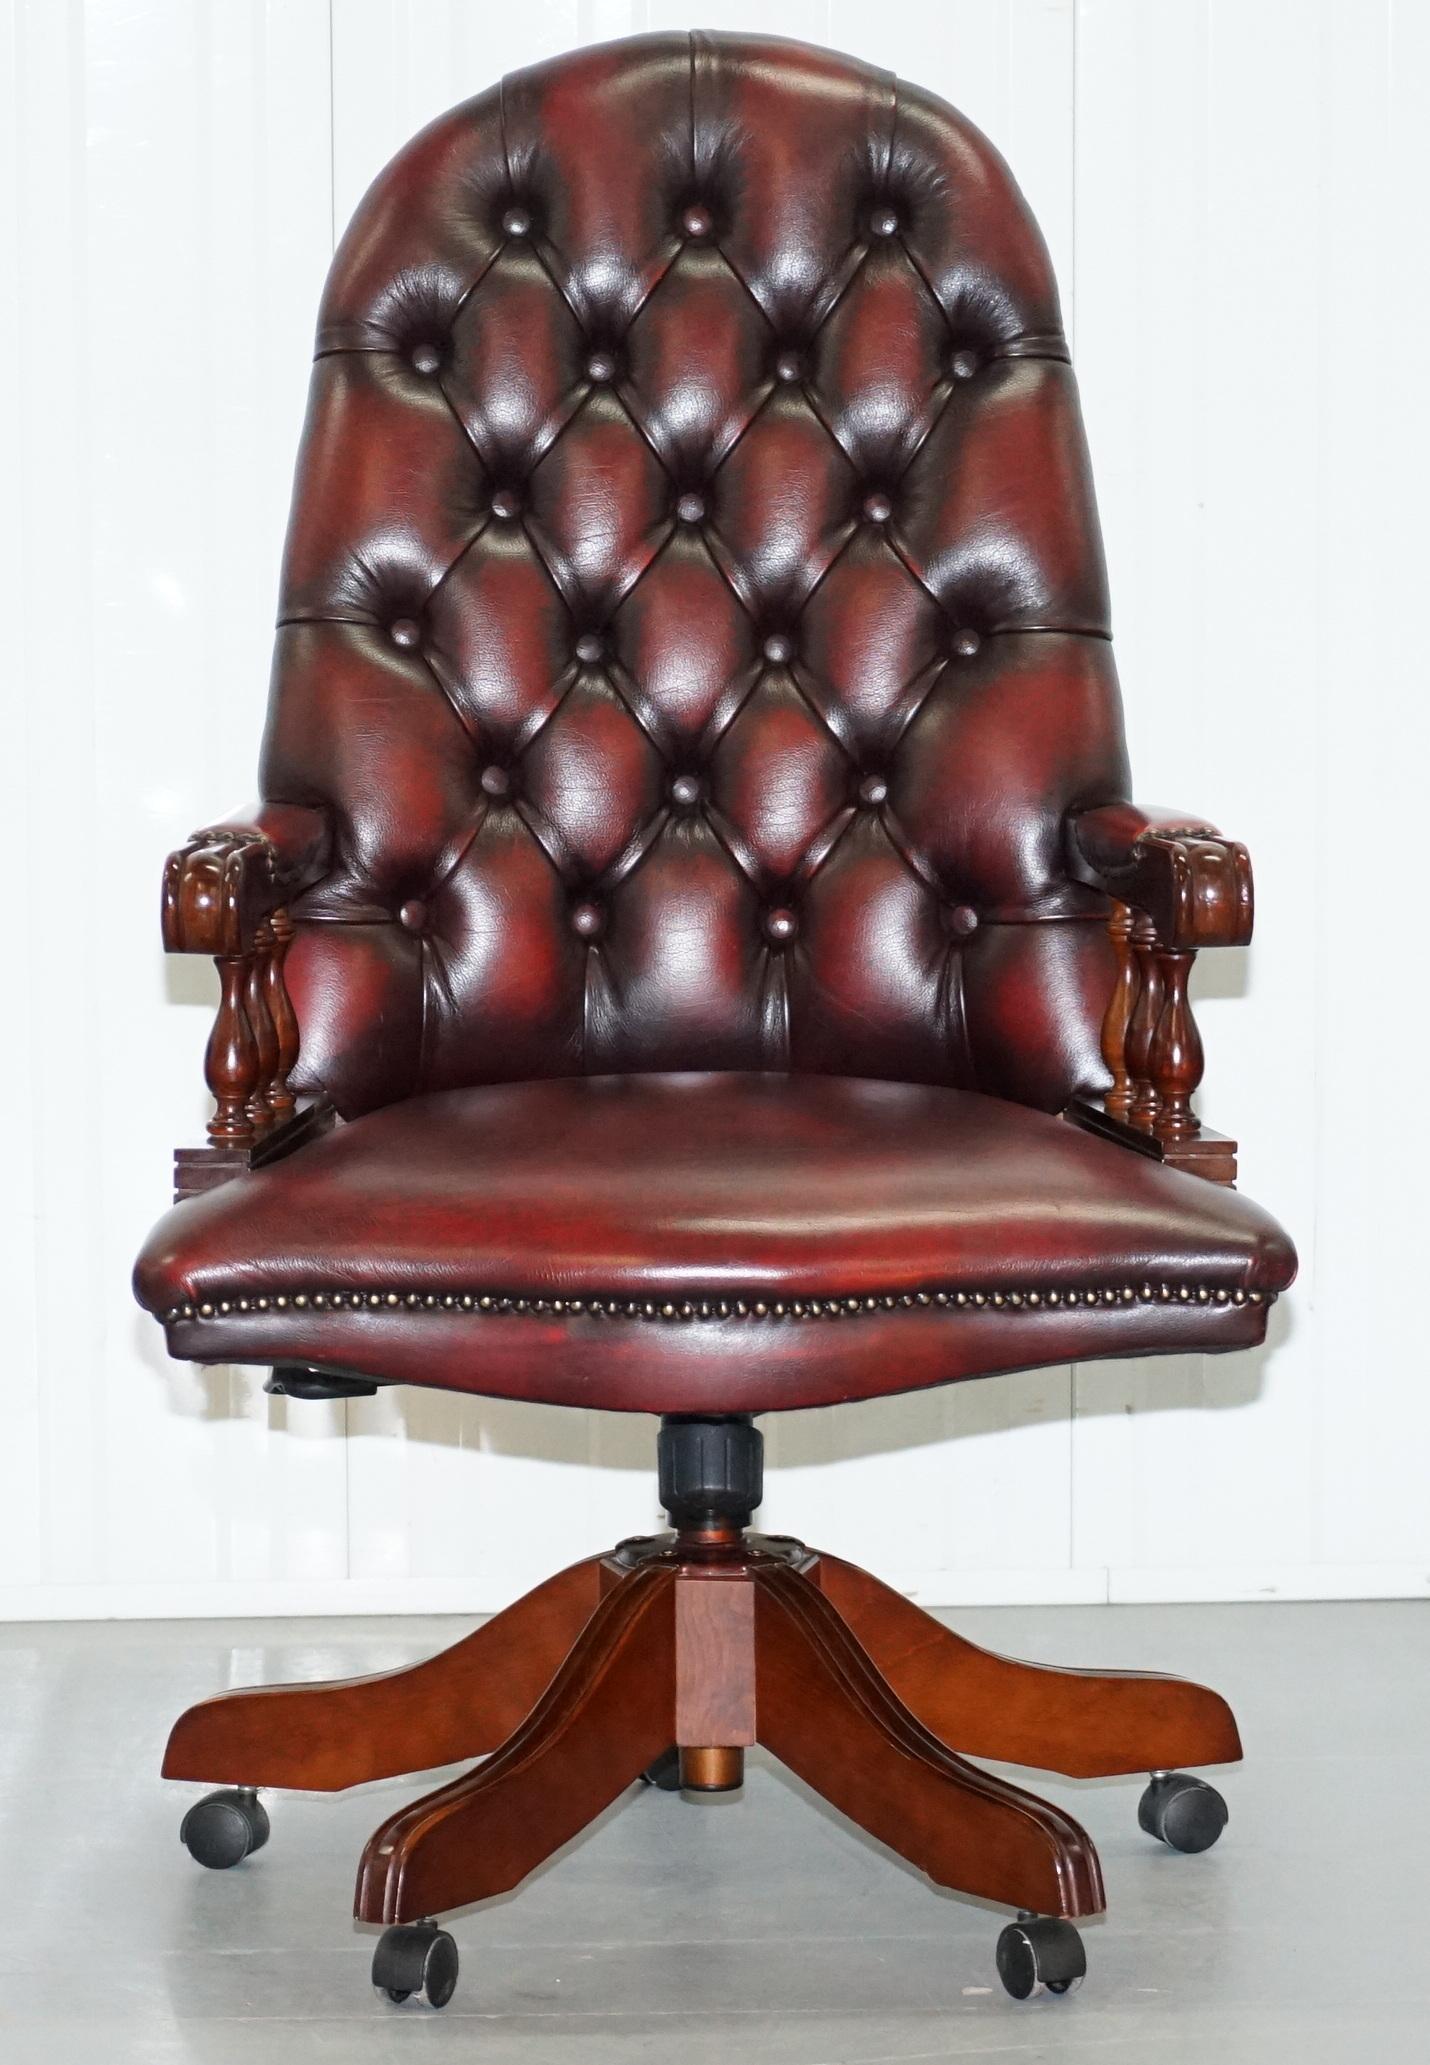 We are delighted to offer for sale this lovely high back Chesterfield directors oxblood leather captains office chair

The chair is in good used condition throughout, we have deep cleaned hand condition waxed and hand polished it from top to